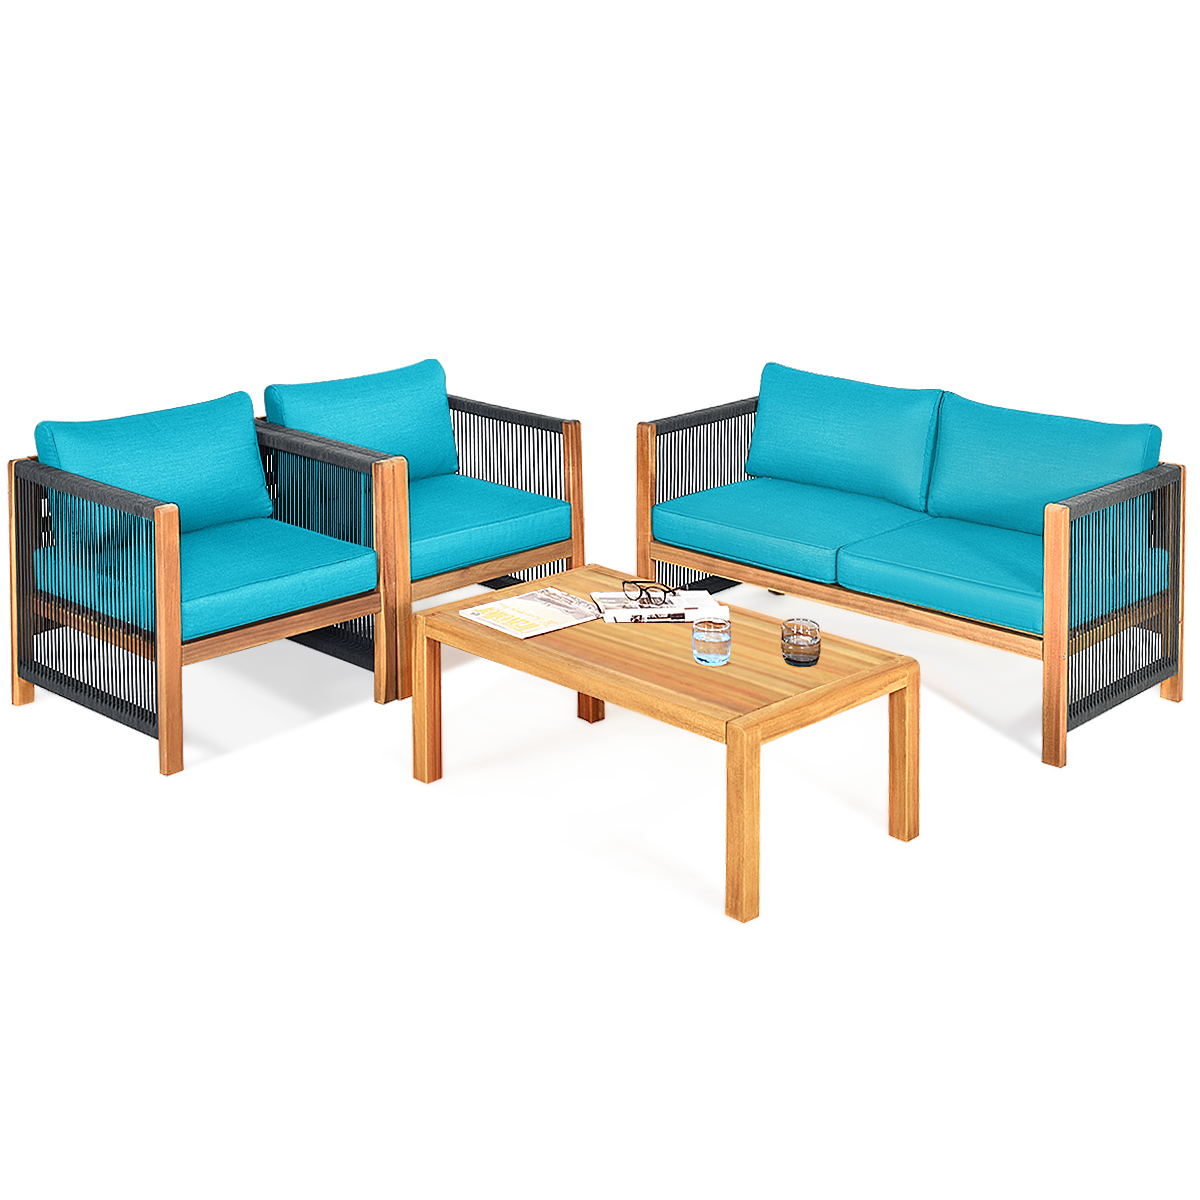 Patiojoy 8-Piece Outdoor Patio Wood Conversation Furniture Set Padded Chair with Coffee Table Turquoise - image 5 of 5